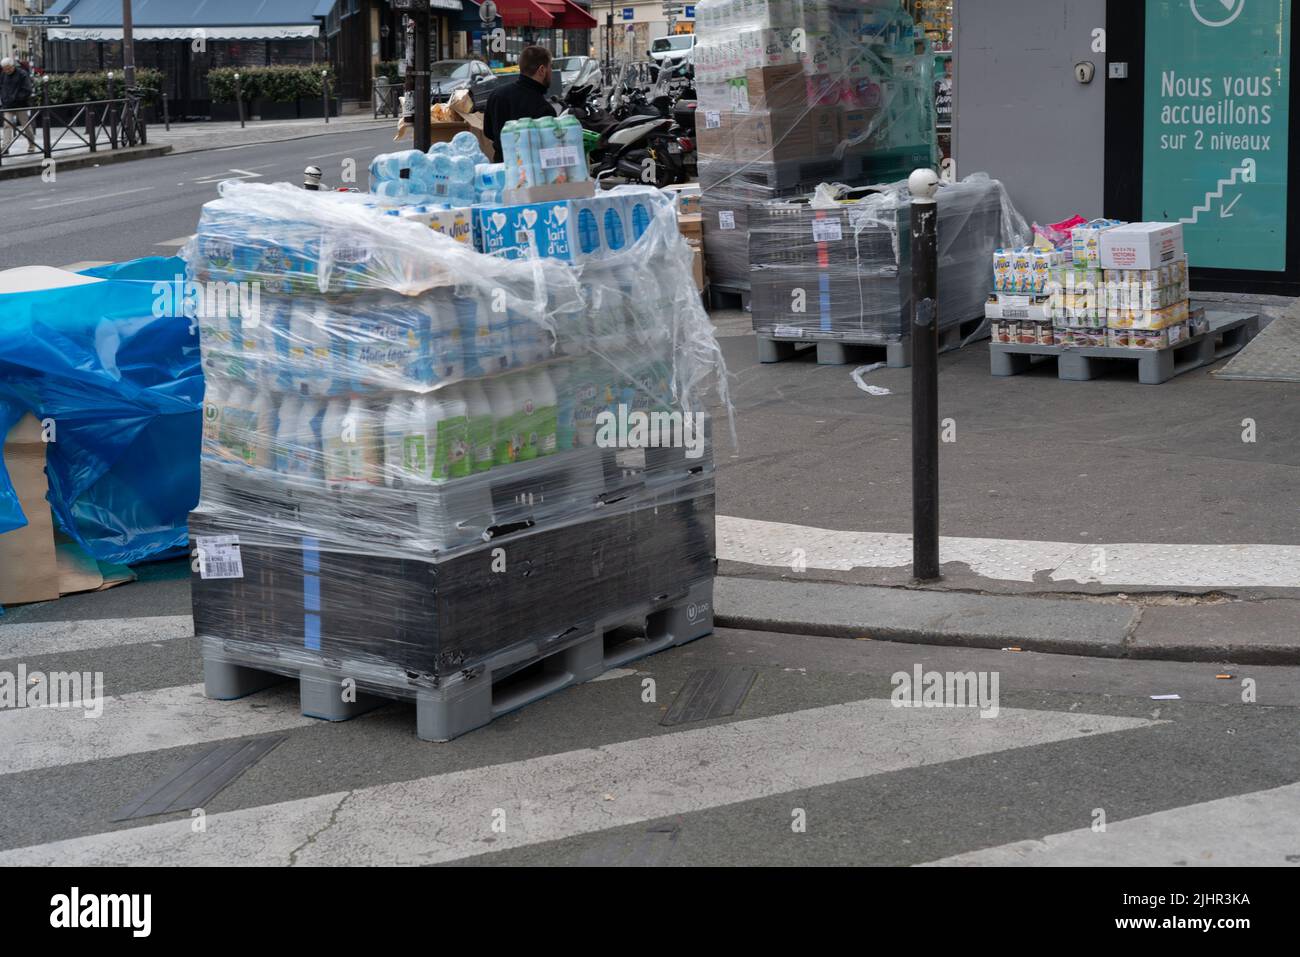 France, Ile de France region, Paris 5th arrondissement, rue des Ecoles, provision of supplies in stores, in order to avoid food shortage during the Covid-19 outbreak Stock Photo